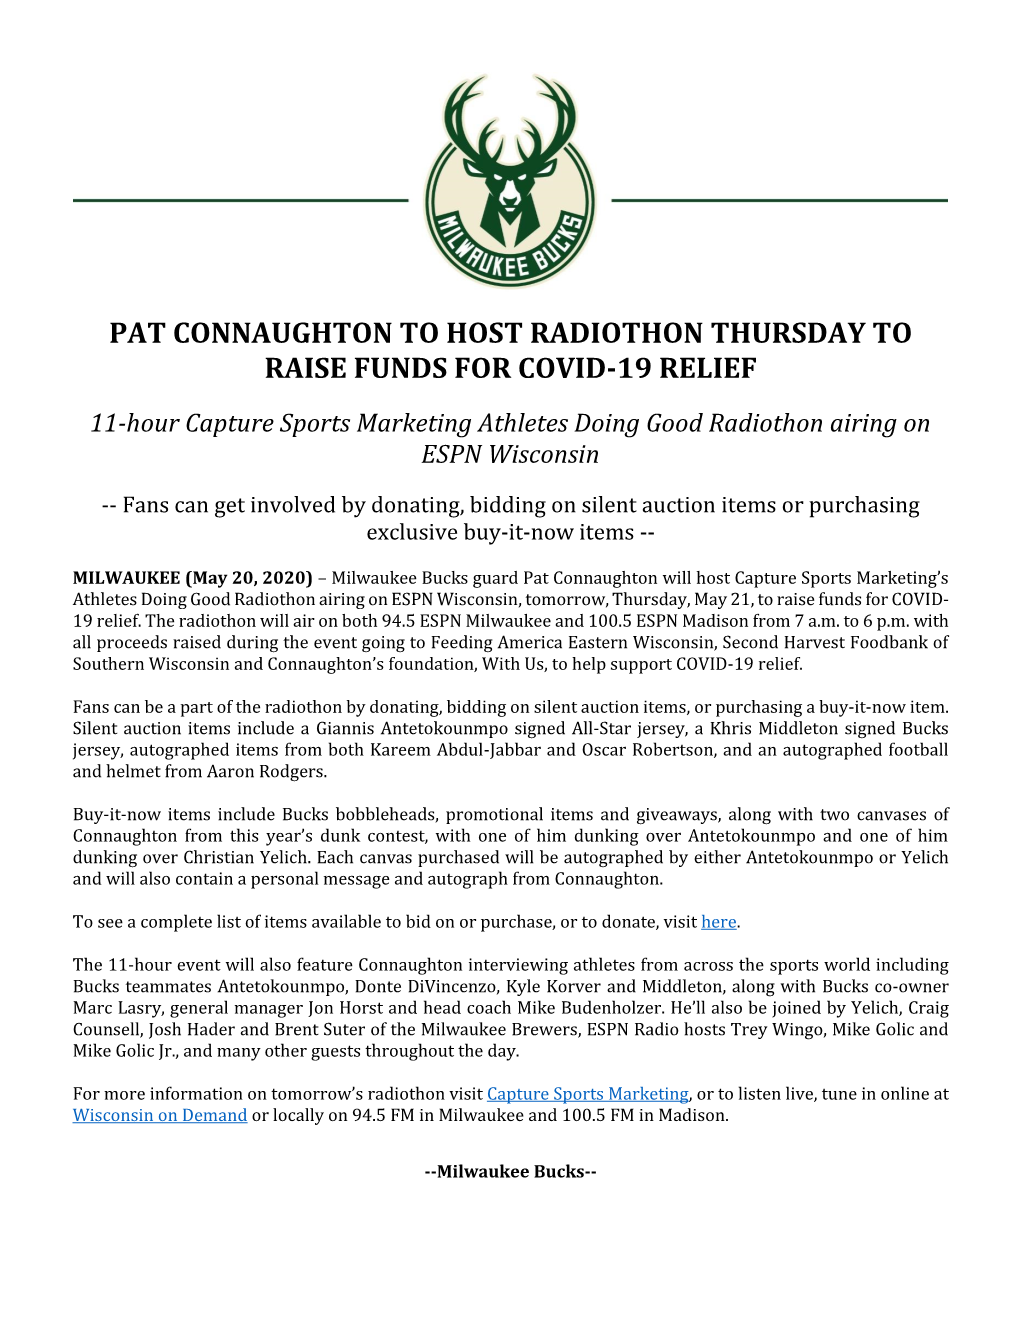 Pat Connaughton to Host Radiothon Thursday to Raise Funds for Covid-19 Relief